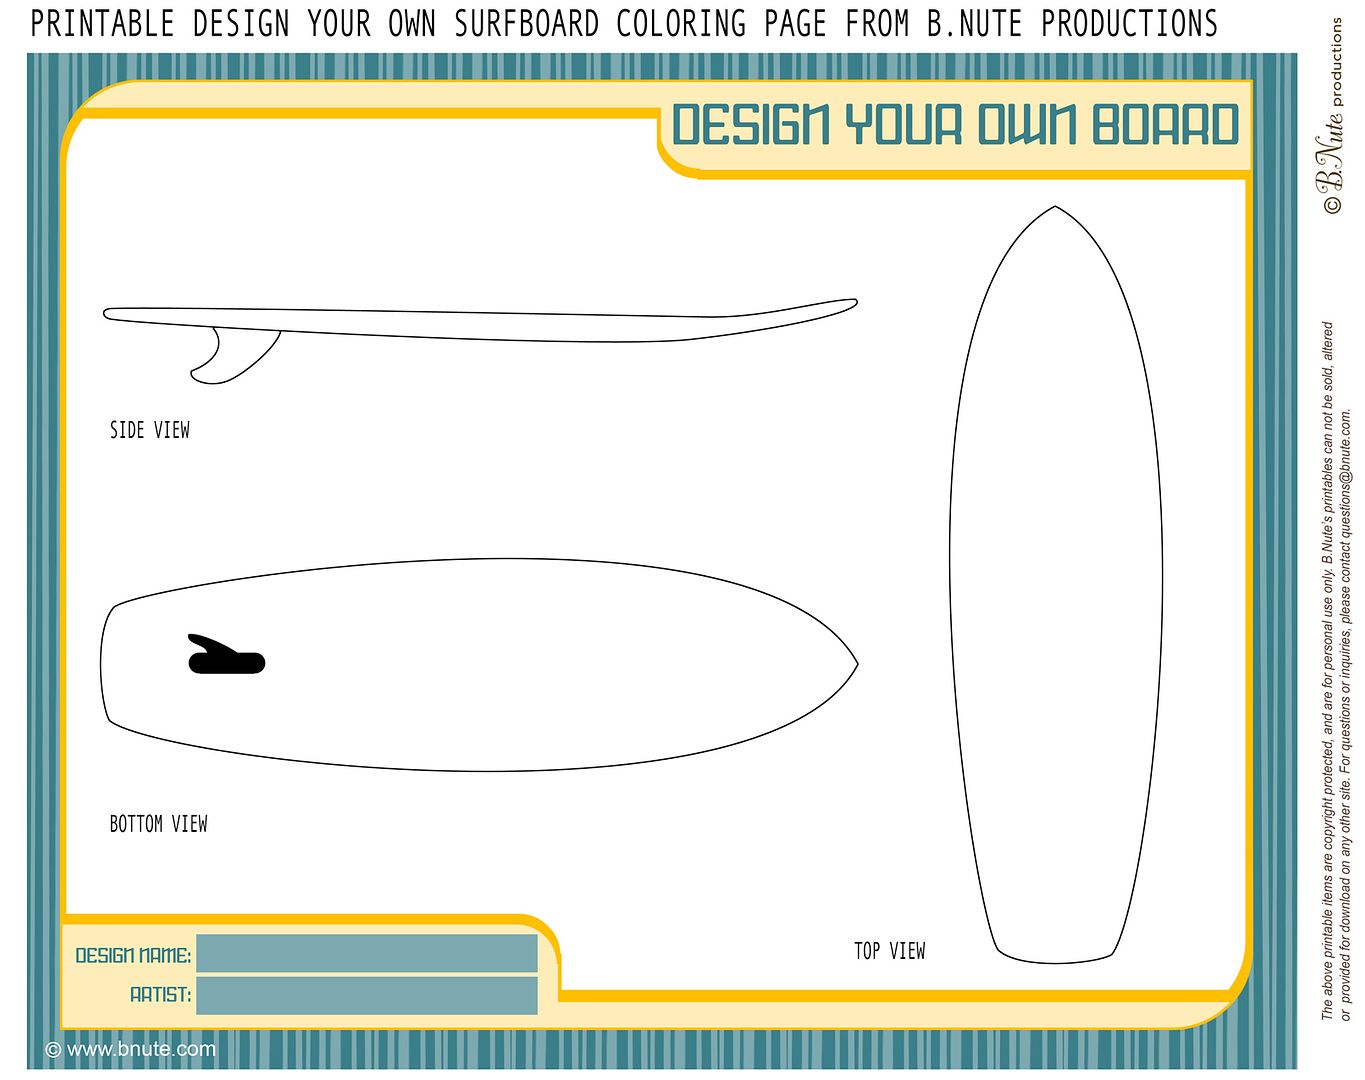 Design Your Own Surfboard free coloring page | bnute productions